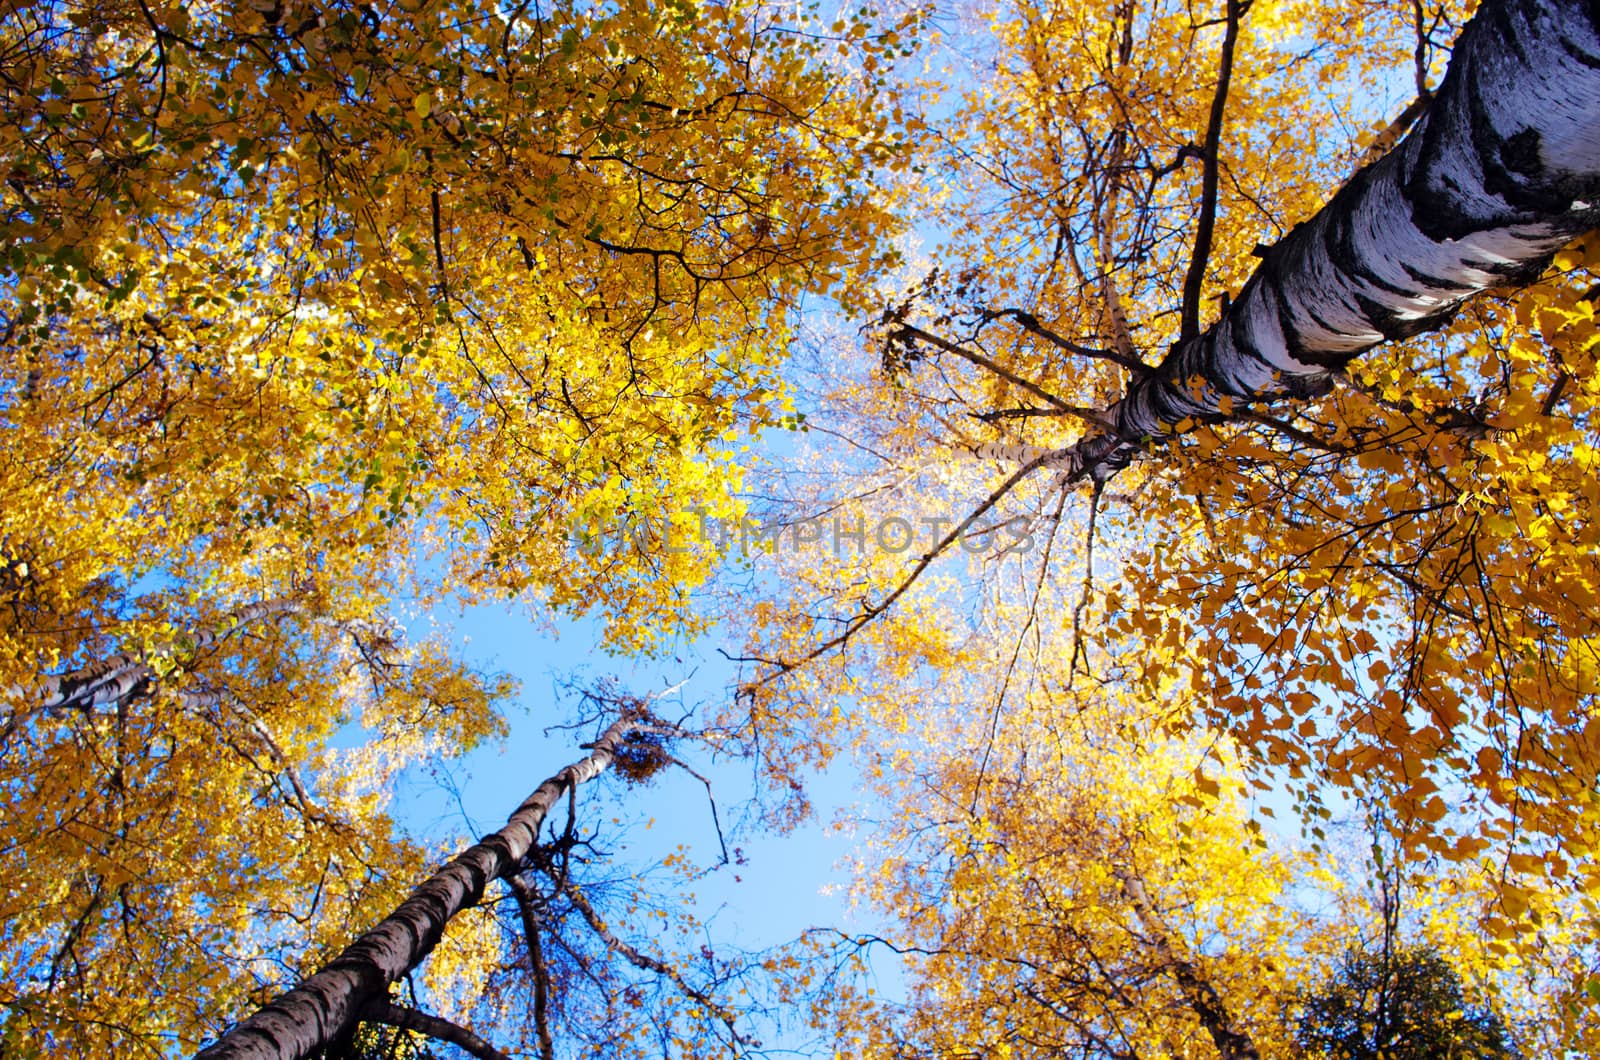 Autumn trees in a forest and clear blue sky with sun